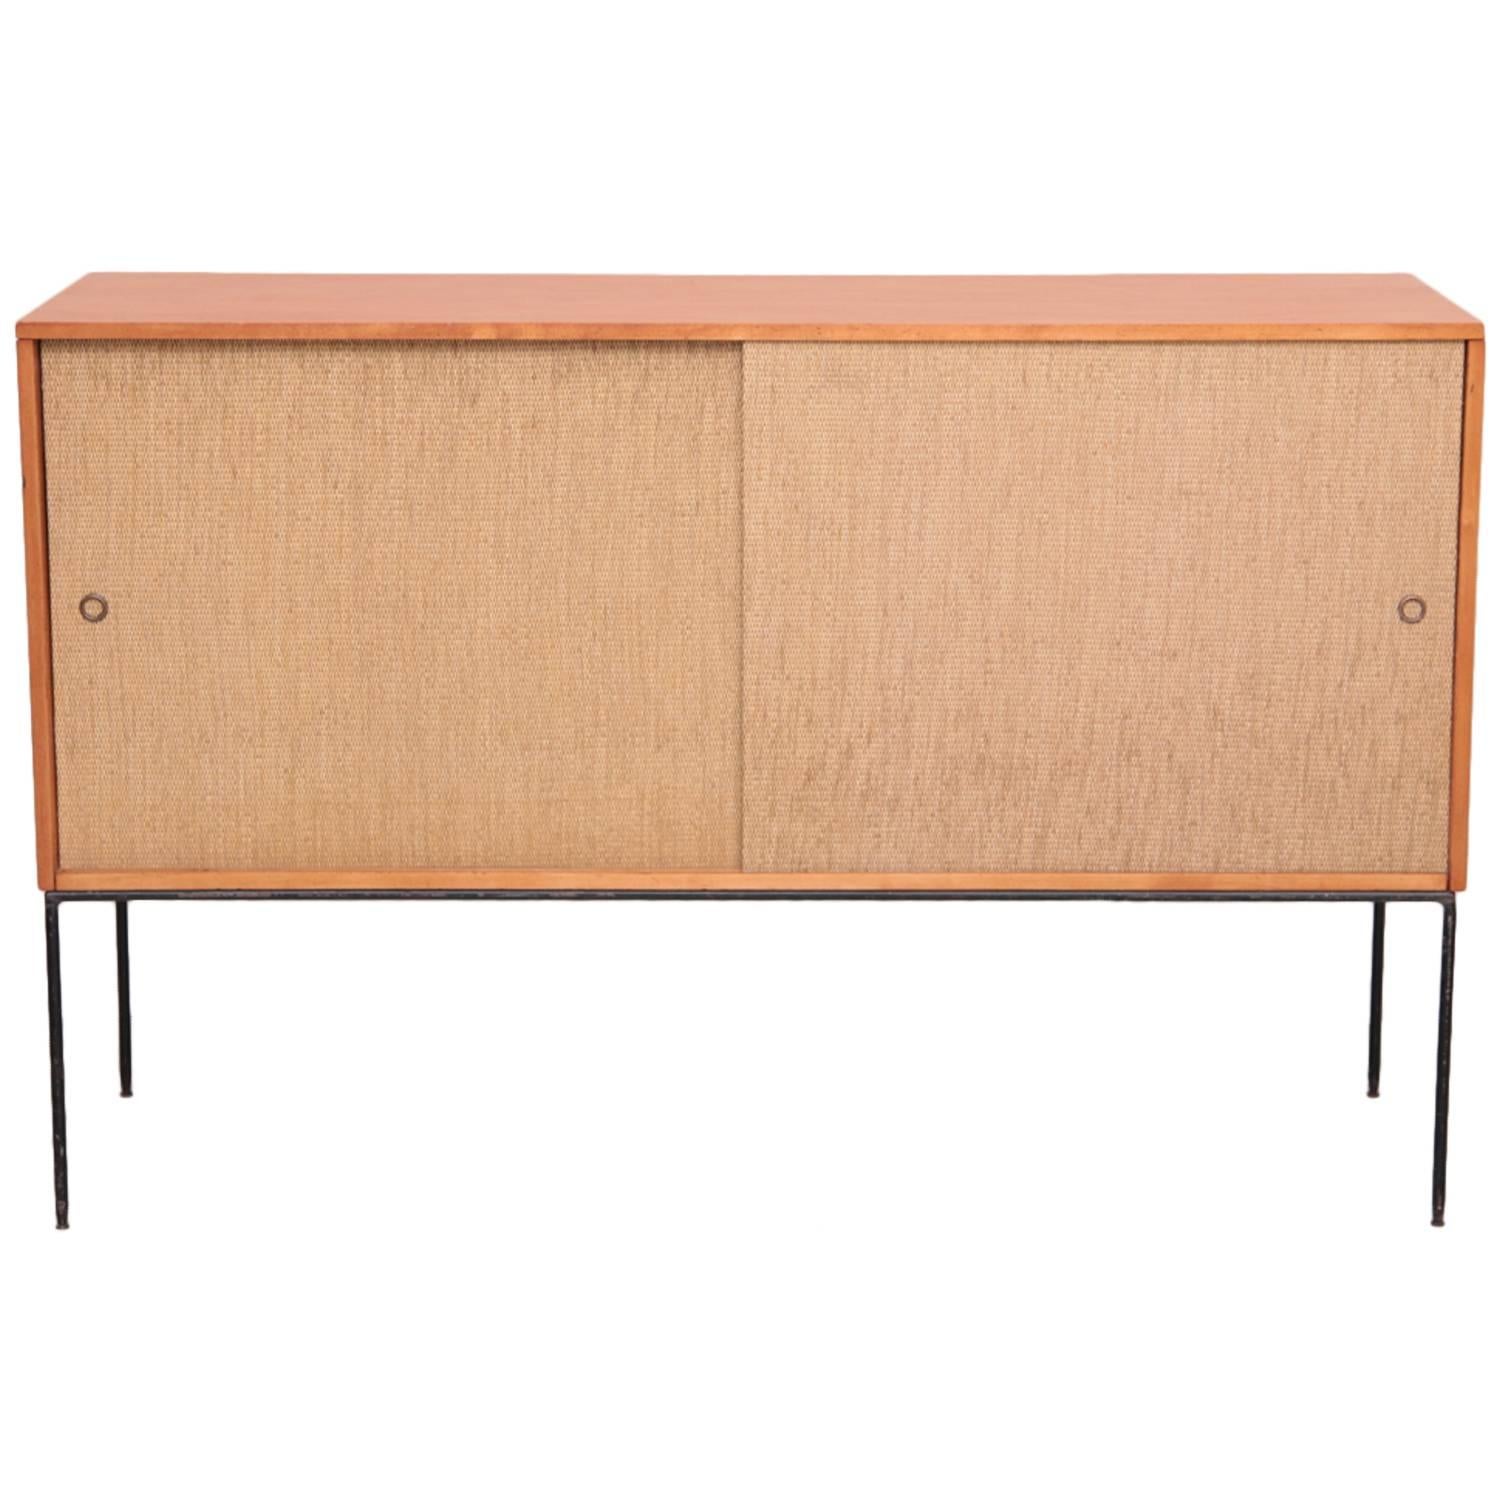 Stunning wrought iron base sideboard or credenza by Paul McCobb for Winchendon with sliding doors and drawers inside.

Excellent vintage condition!

